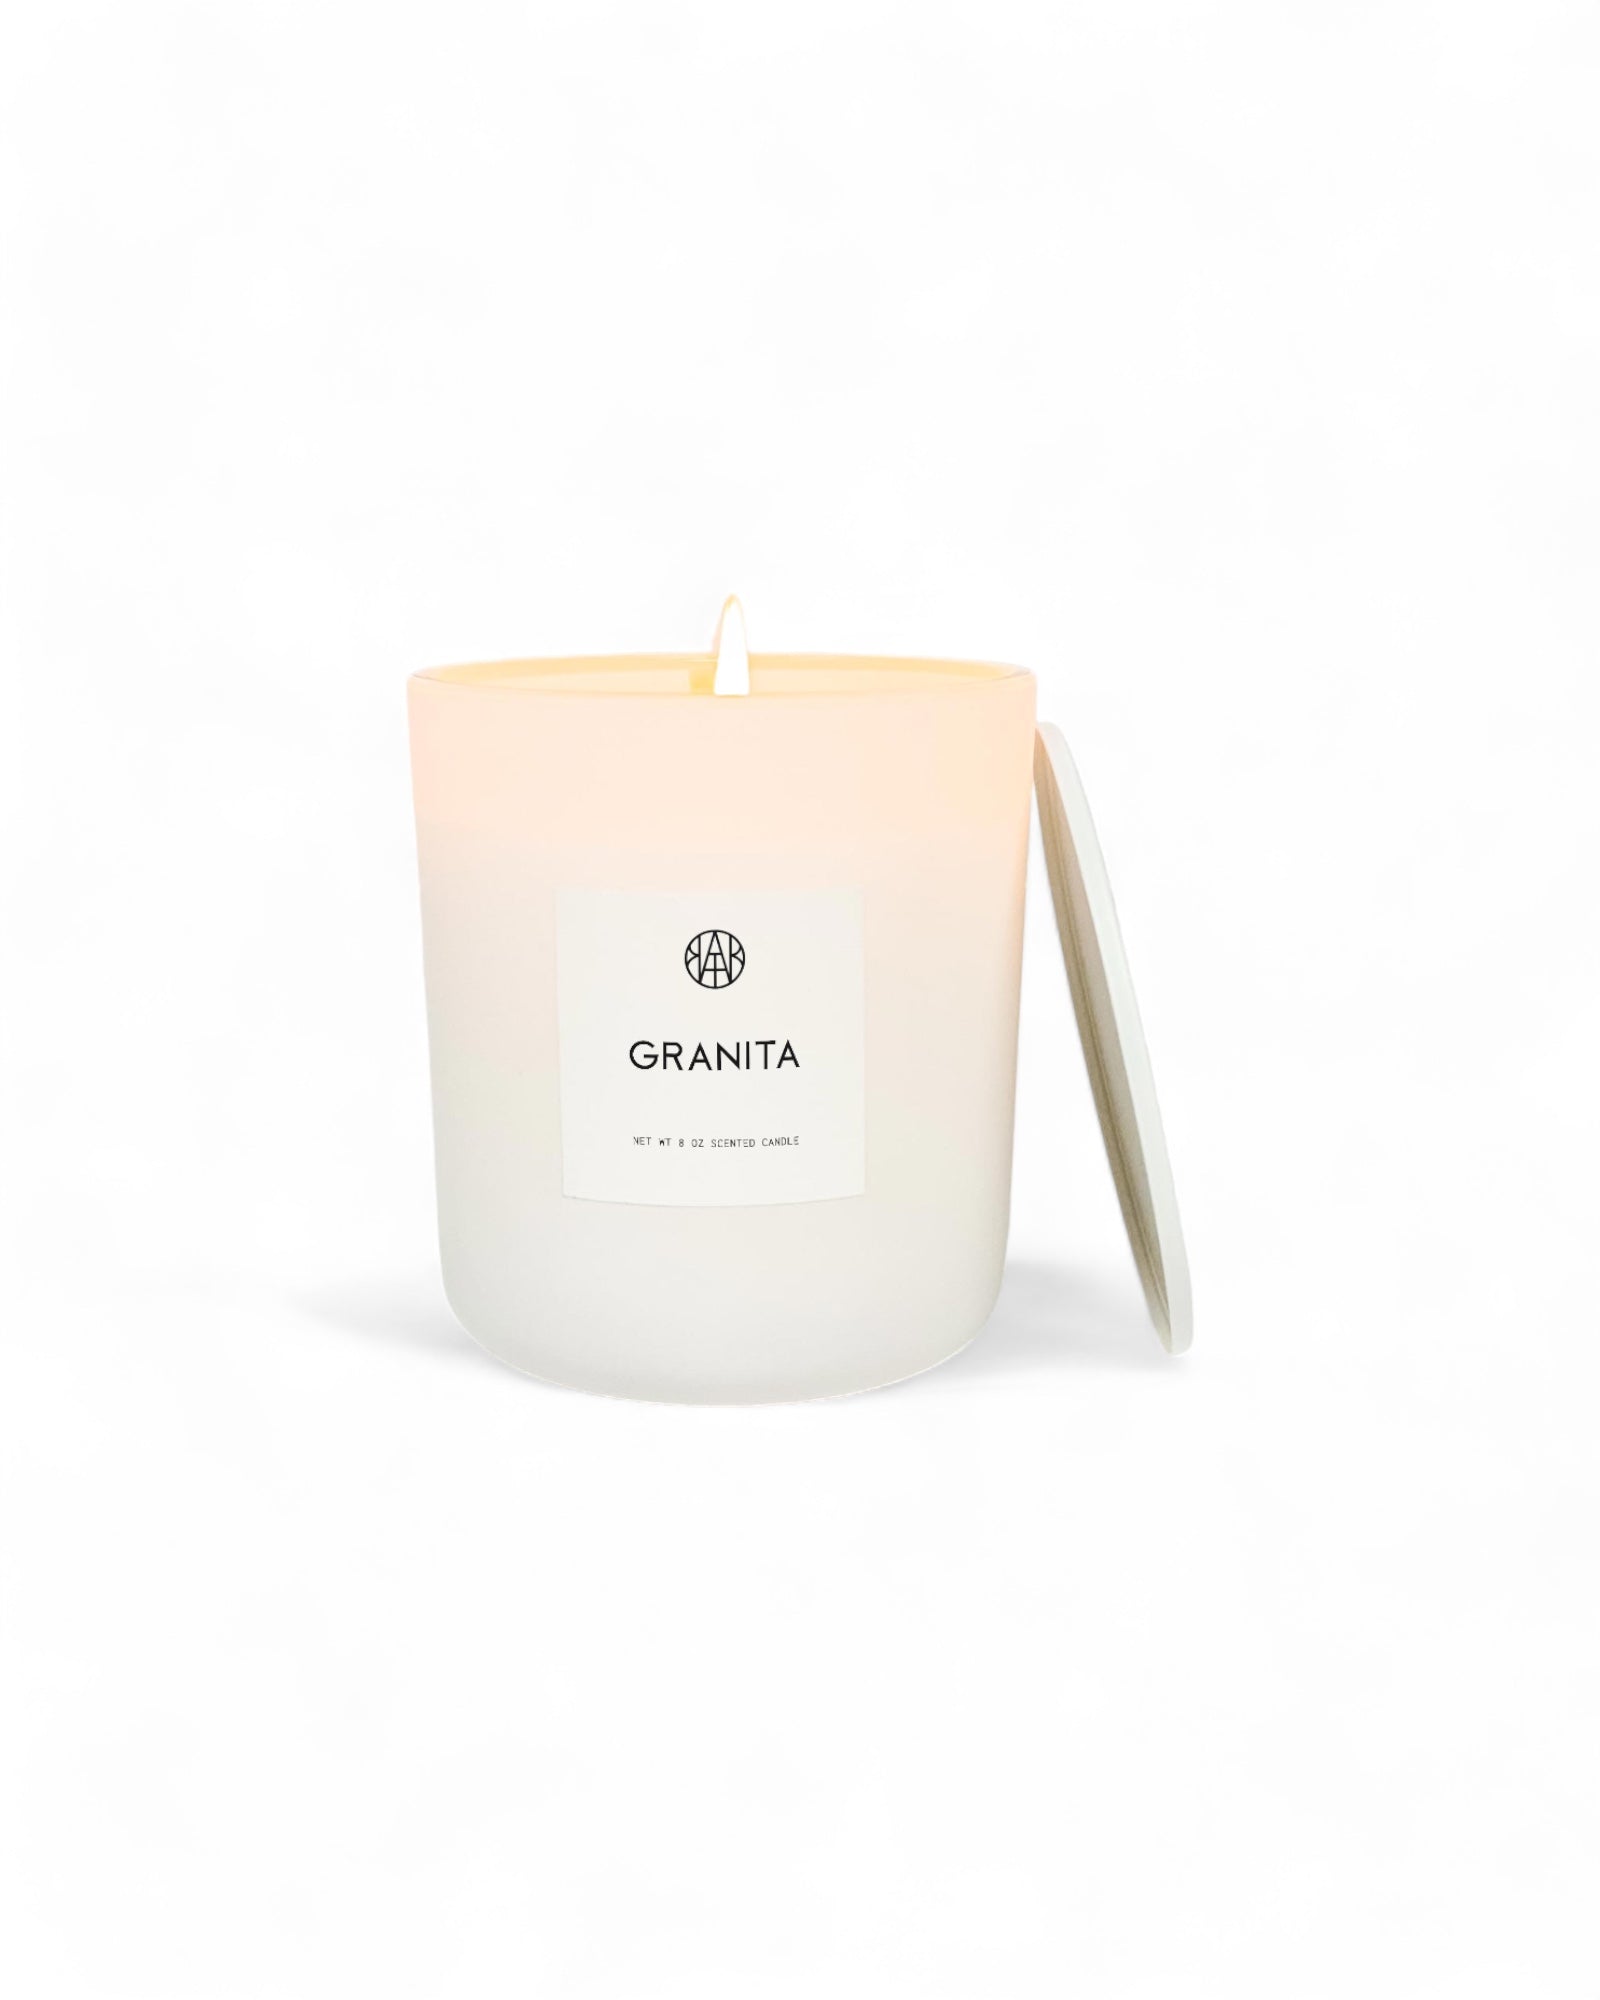 GRANITA - Classic Candle - AEMBR - Clean Luxury Candles, Wax Melts & Laundry Care